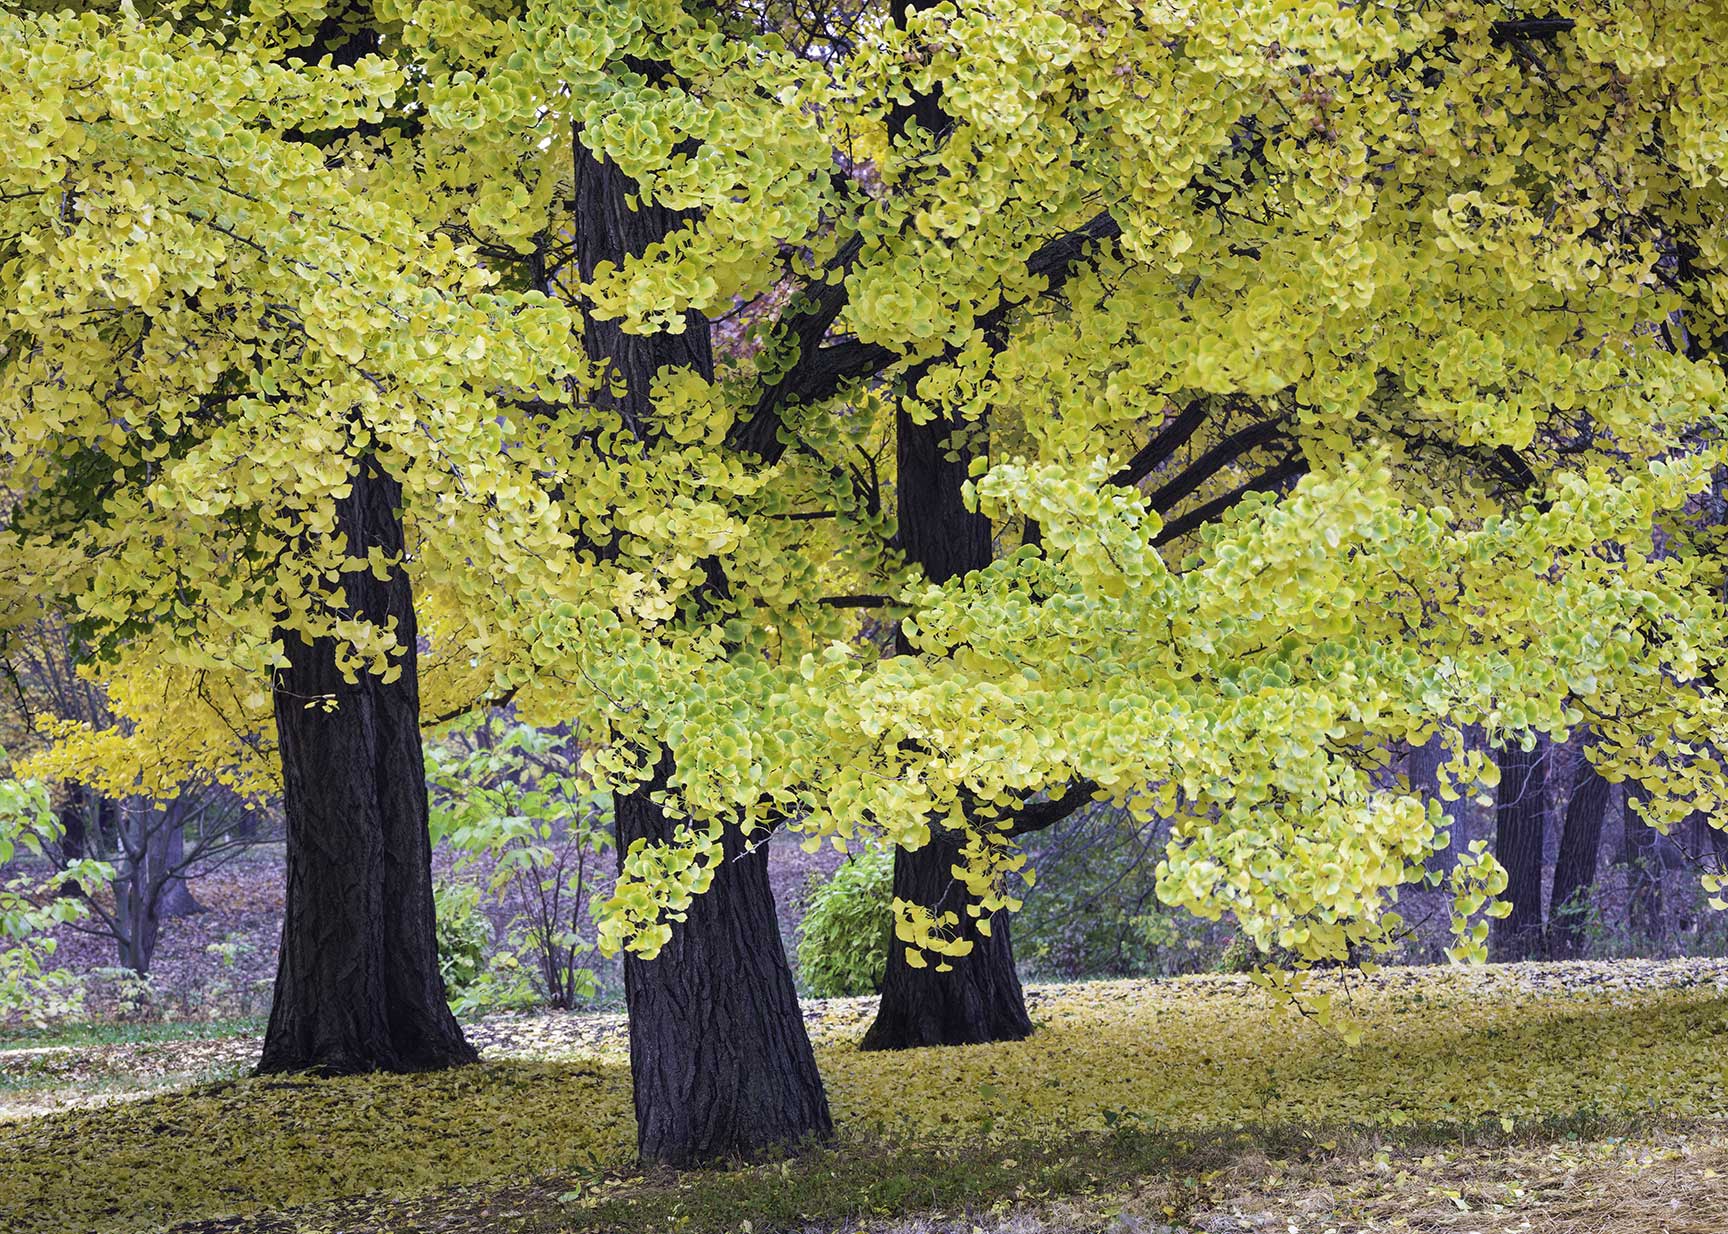 Endangered Ginkgo biloba is the sole survivor from an ancient clade of trees that predates the dinosaurs, making it the most evolutionarily distinct gymnosperm alive today.